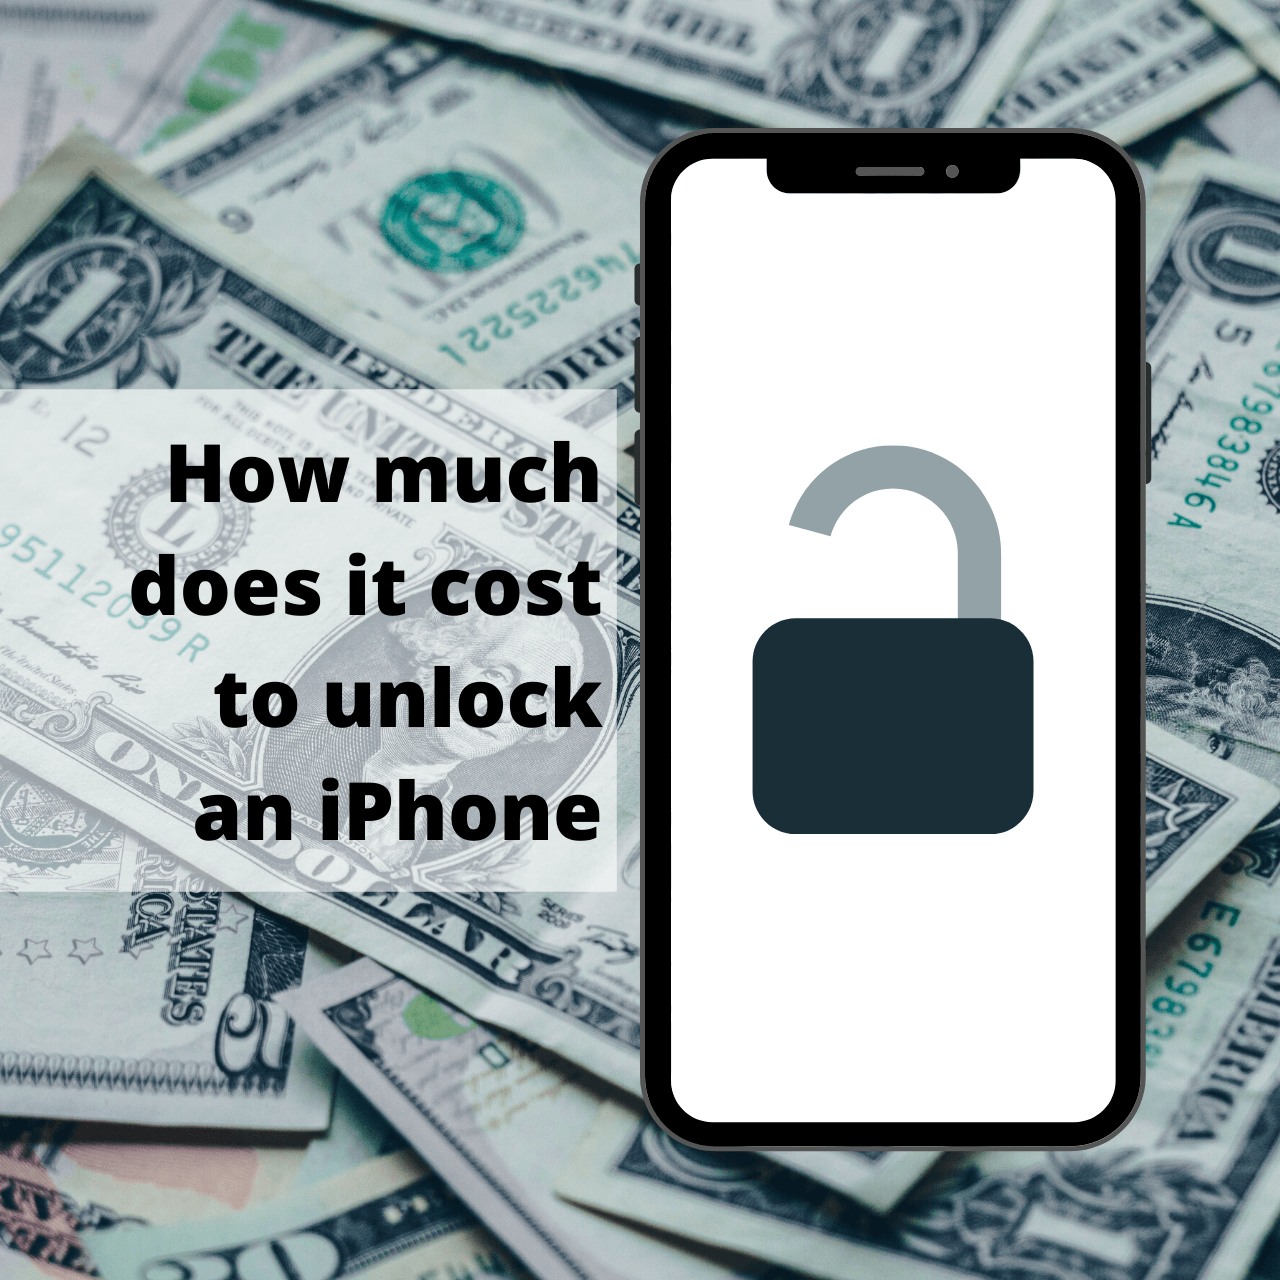 Can i pay monthly for an unlocked iphone